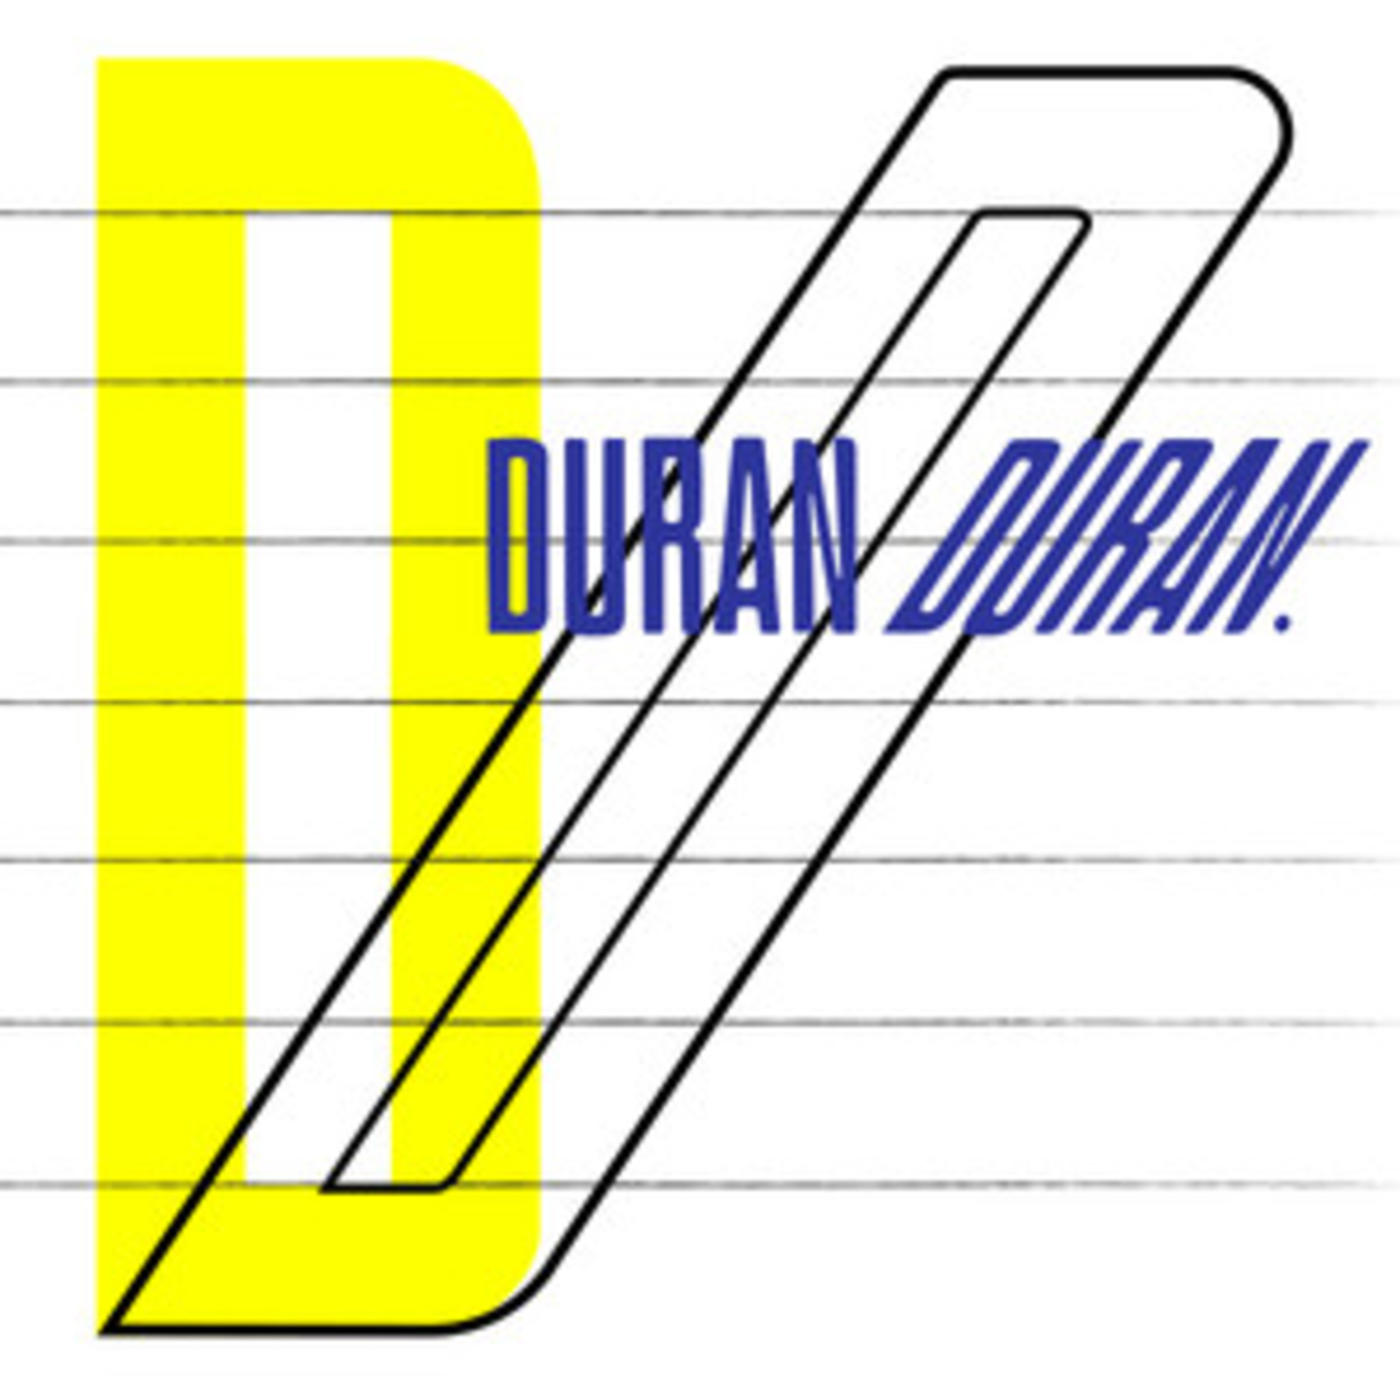 Official Duran Duran Playlist - Hungry Like the Wolf, Rio, Planet Earth, Ordinary World, Come Undone